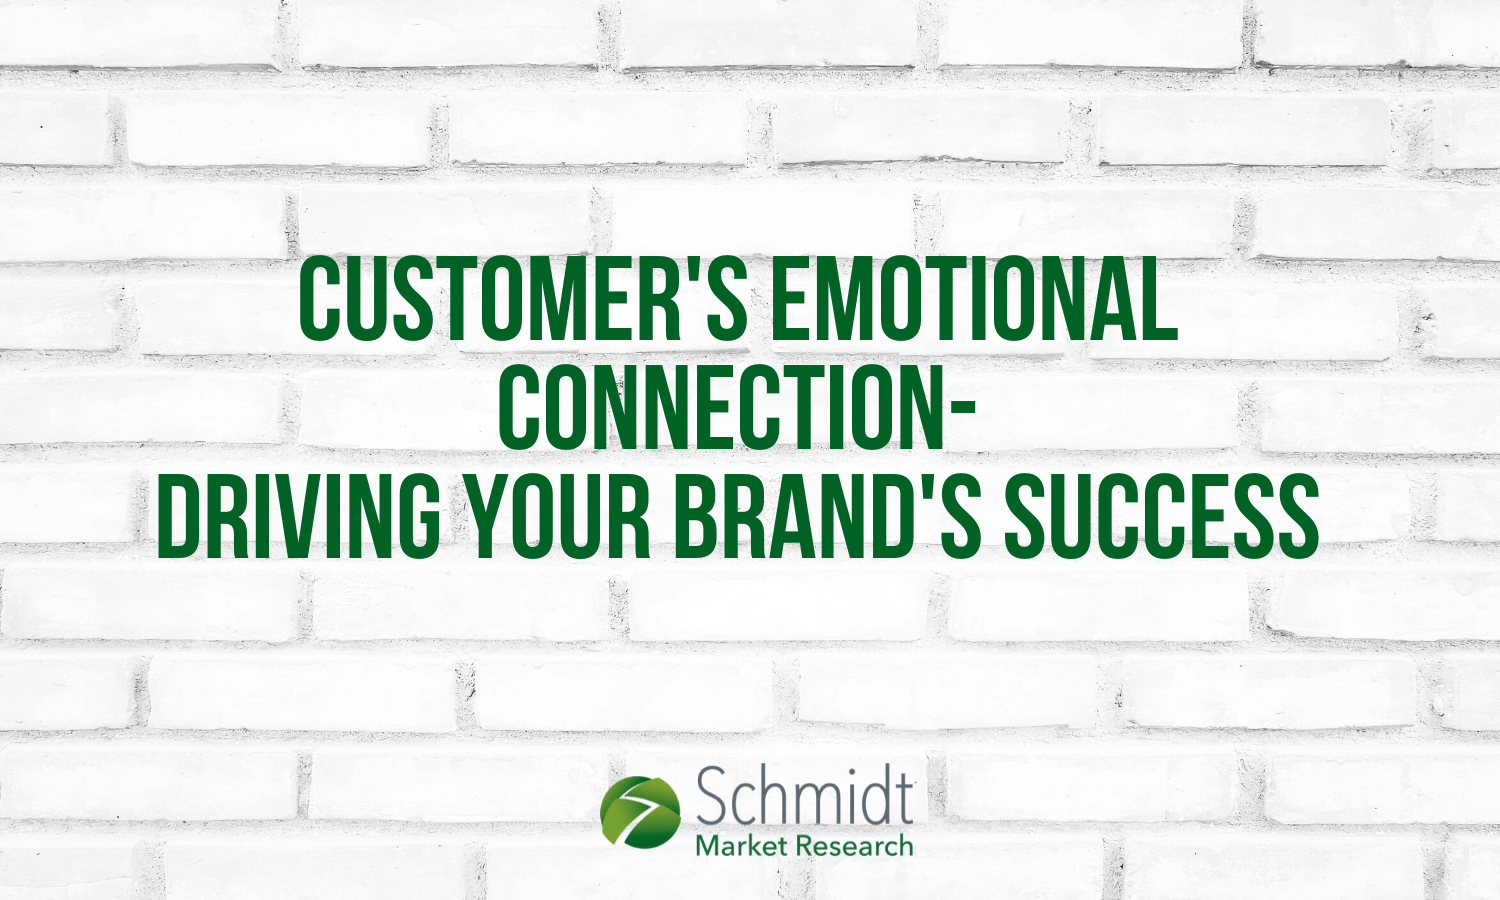 Schmidt Market Research: Customer's emotional connection- driving your brand's success with EC5